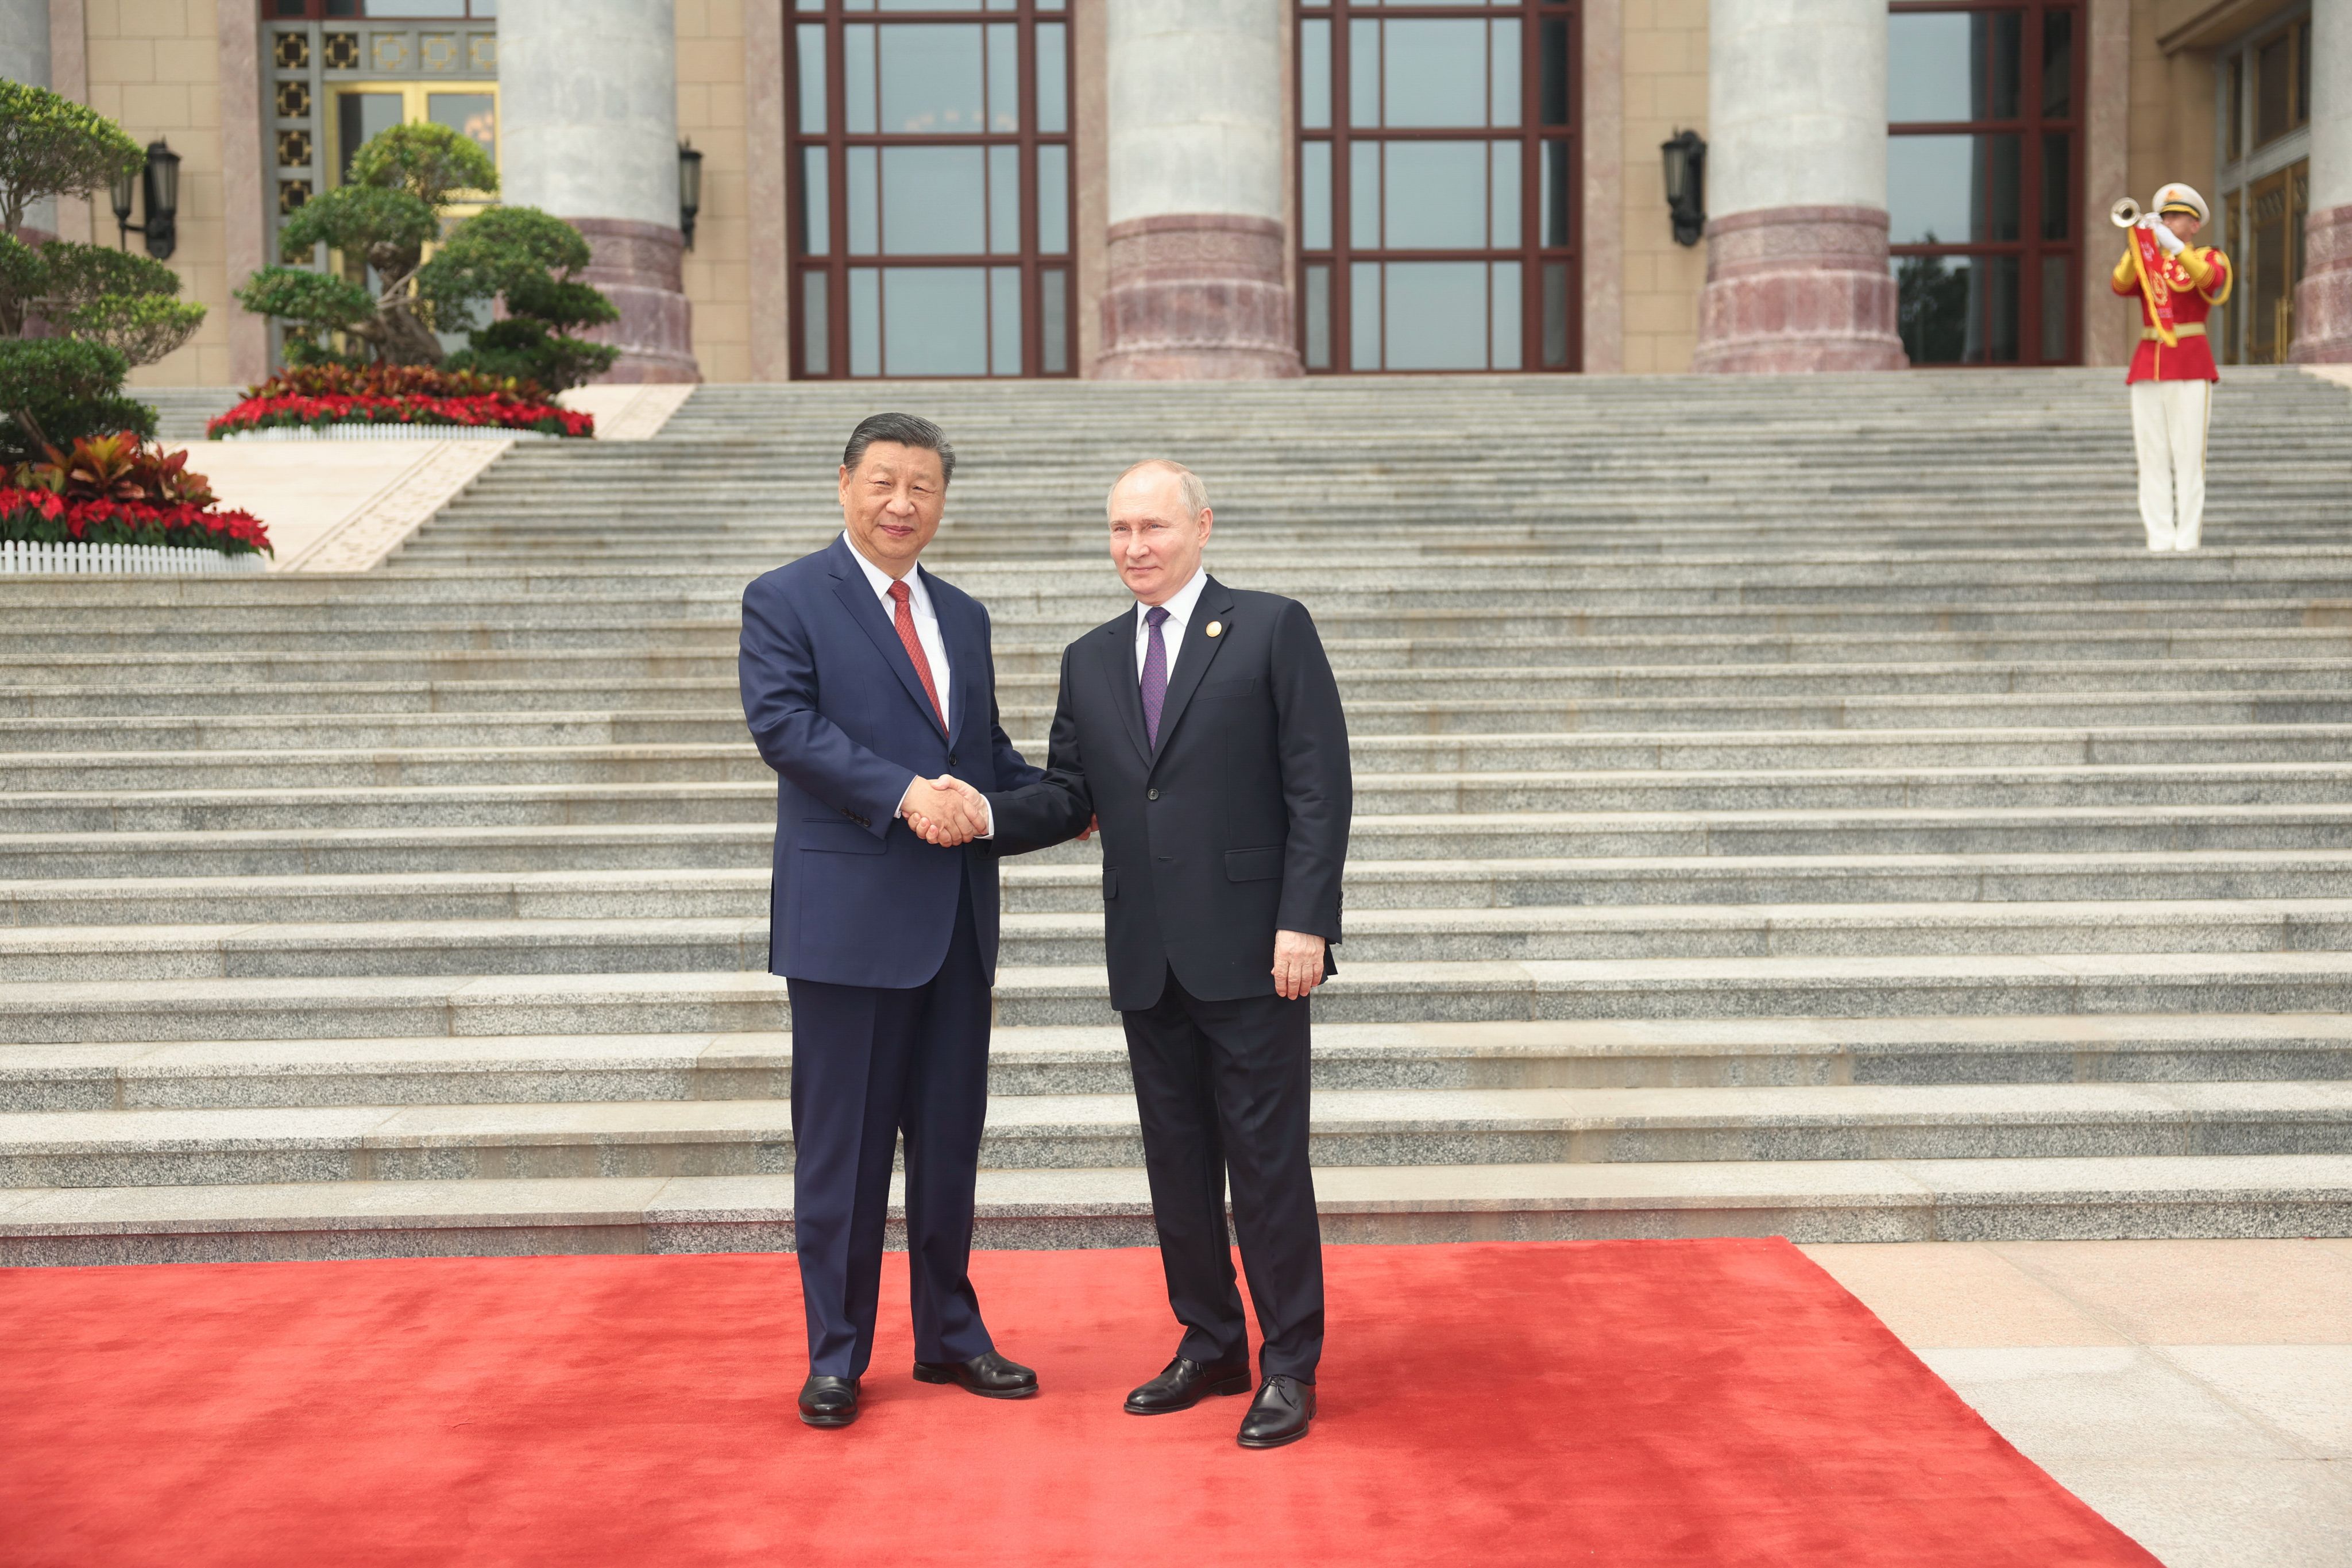 Russian President Vladimir Putin and Chinese President Xi Jinping shake hands outside the east gate of the Great Hall of the People in Beijing on Thursday. Photo: Xinhua